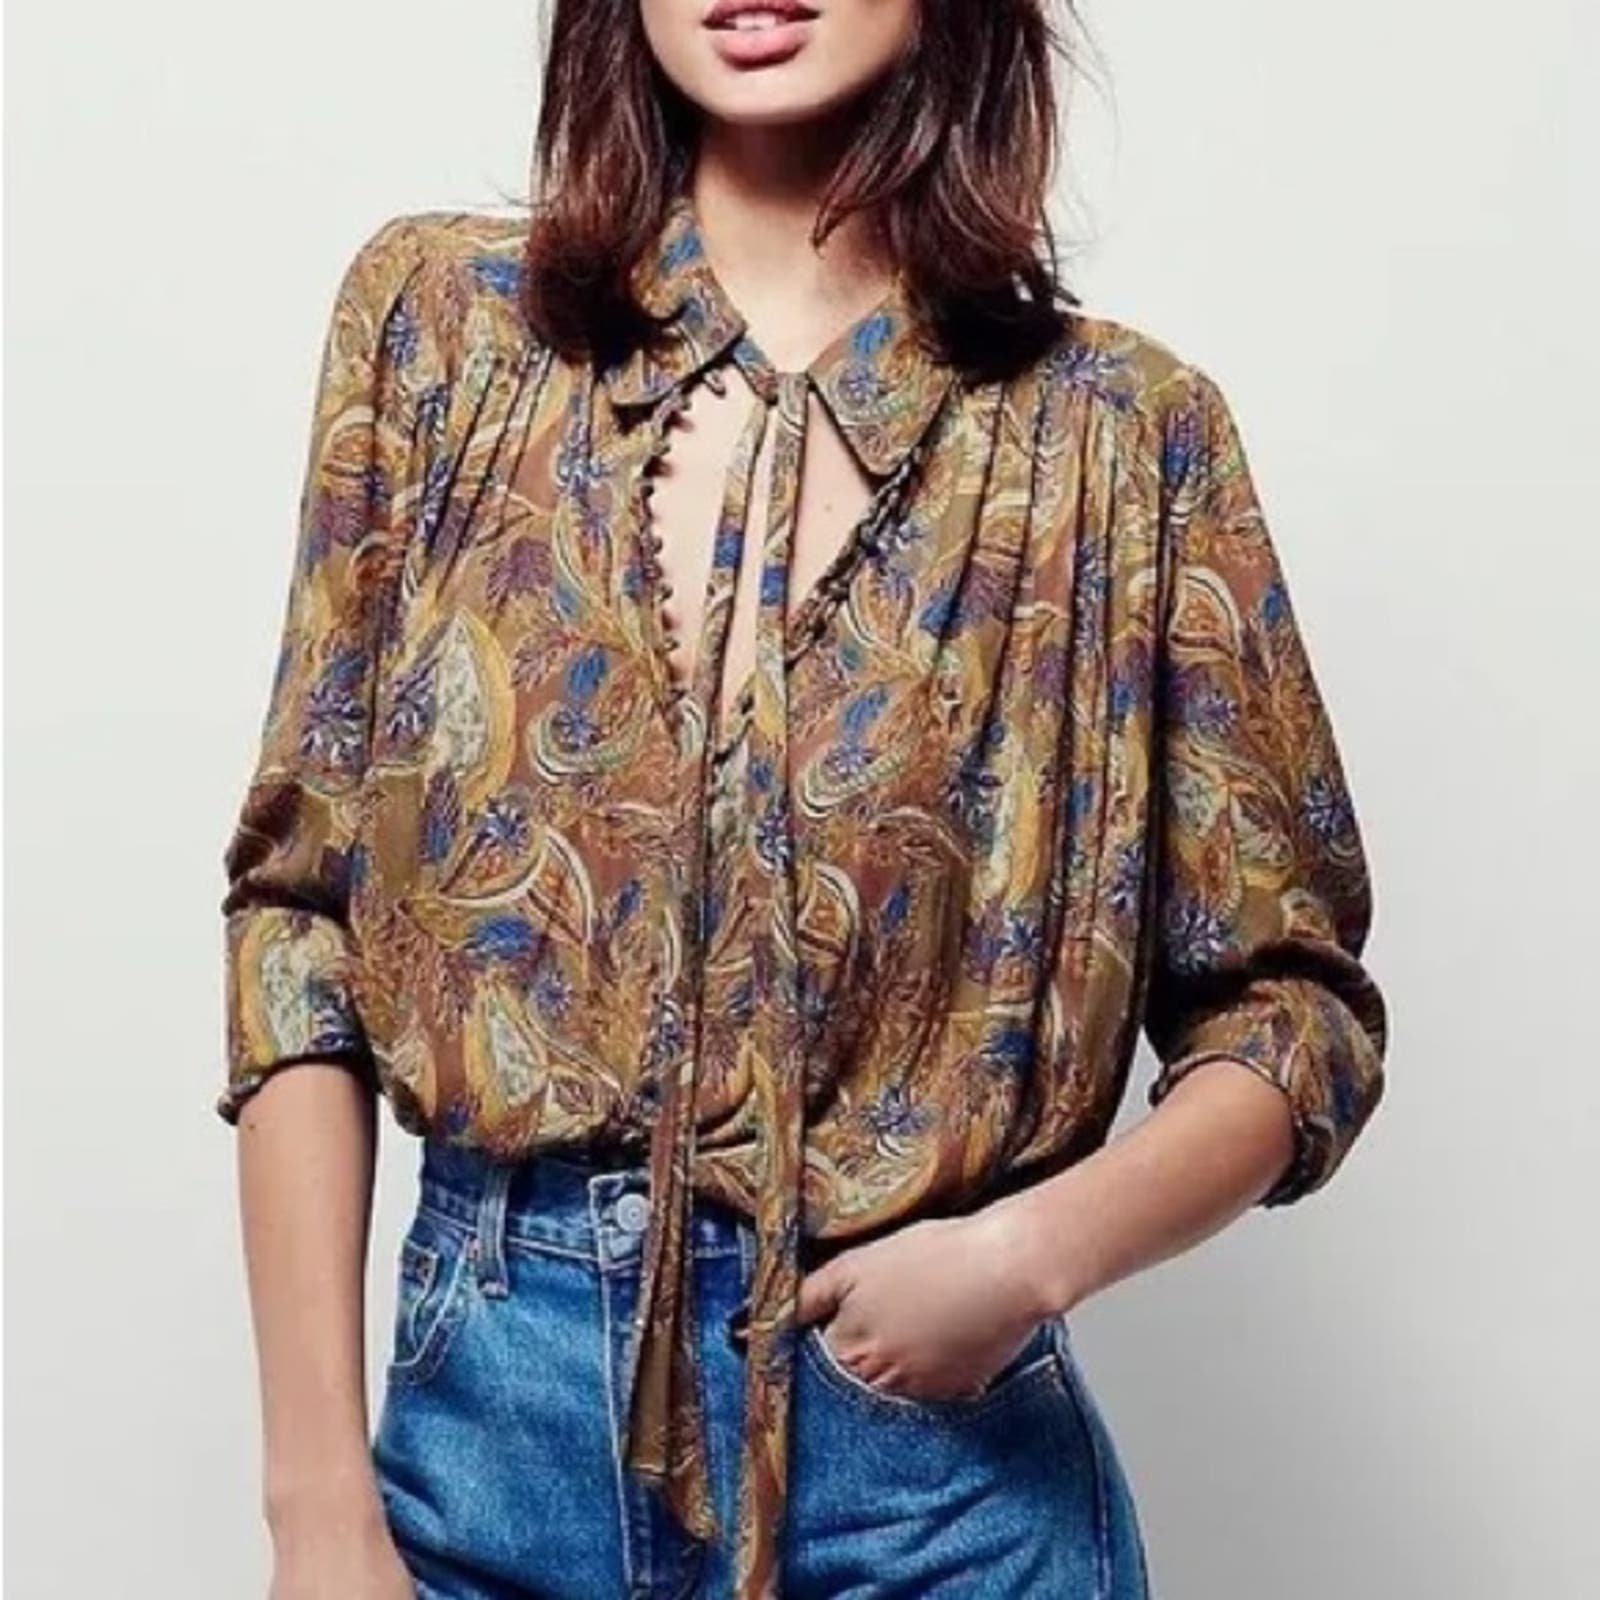 Latest  Free People Button Up Green & Blue Blouse Mediu